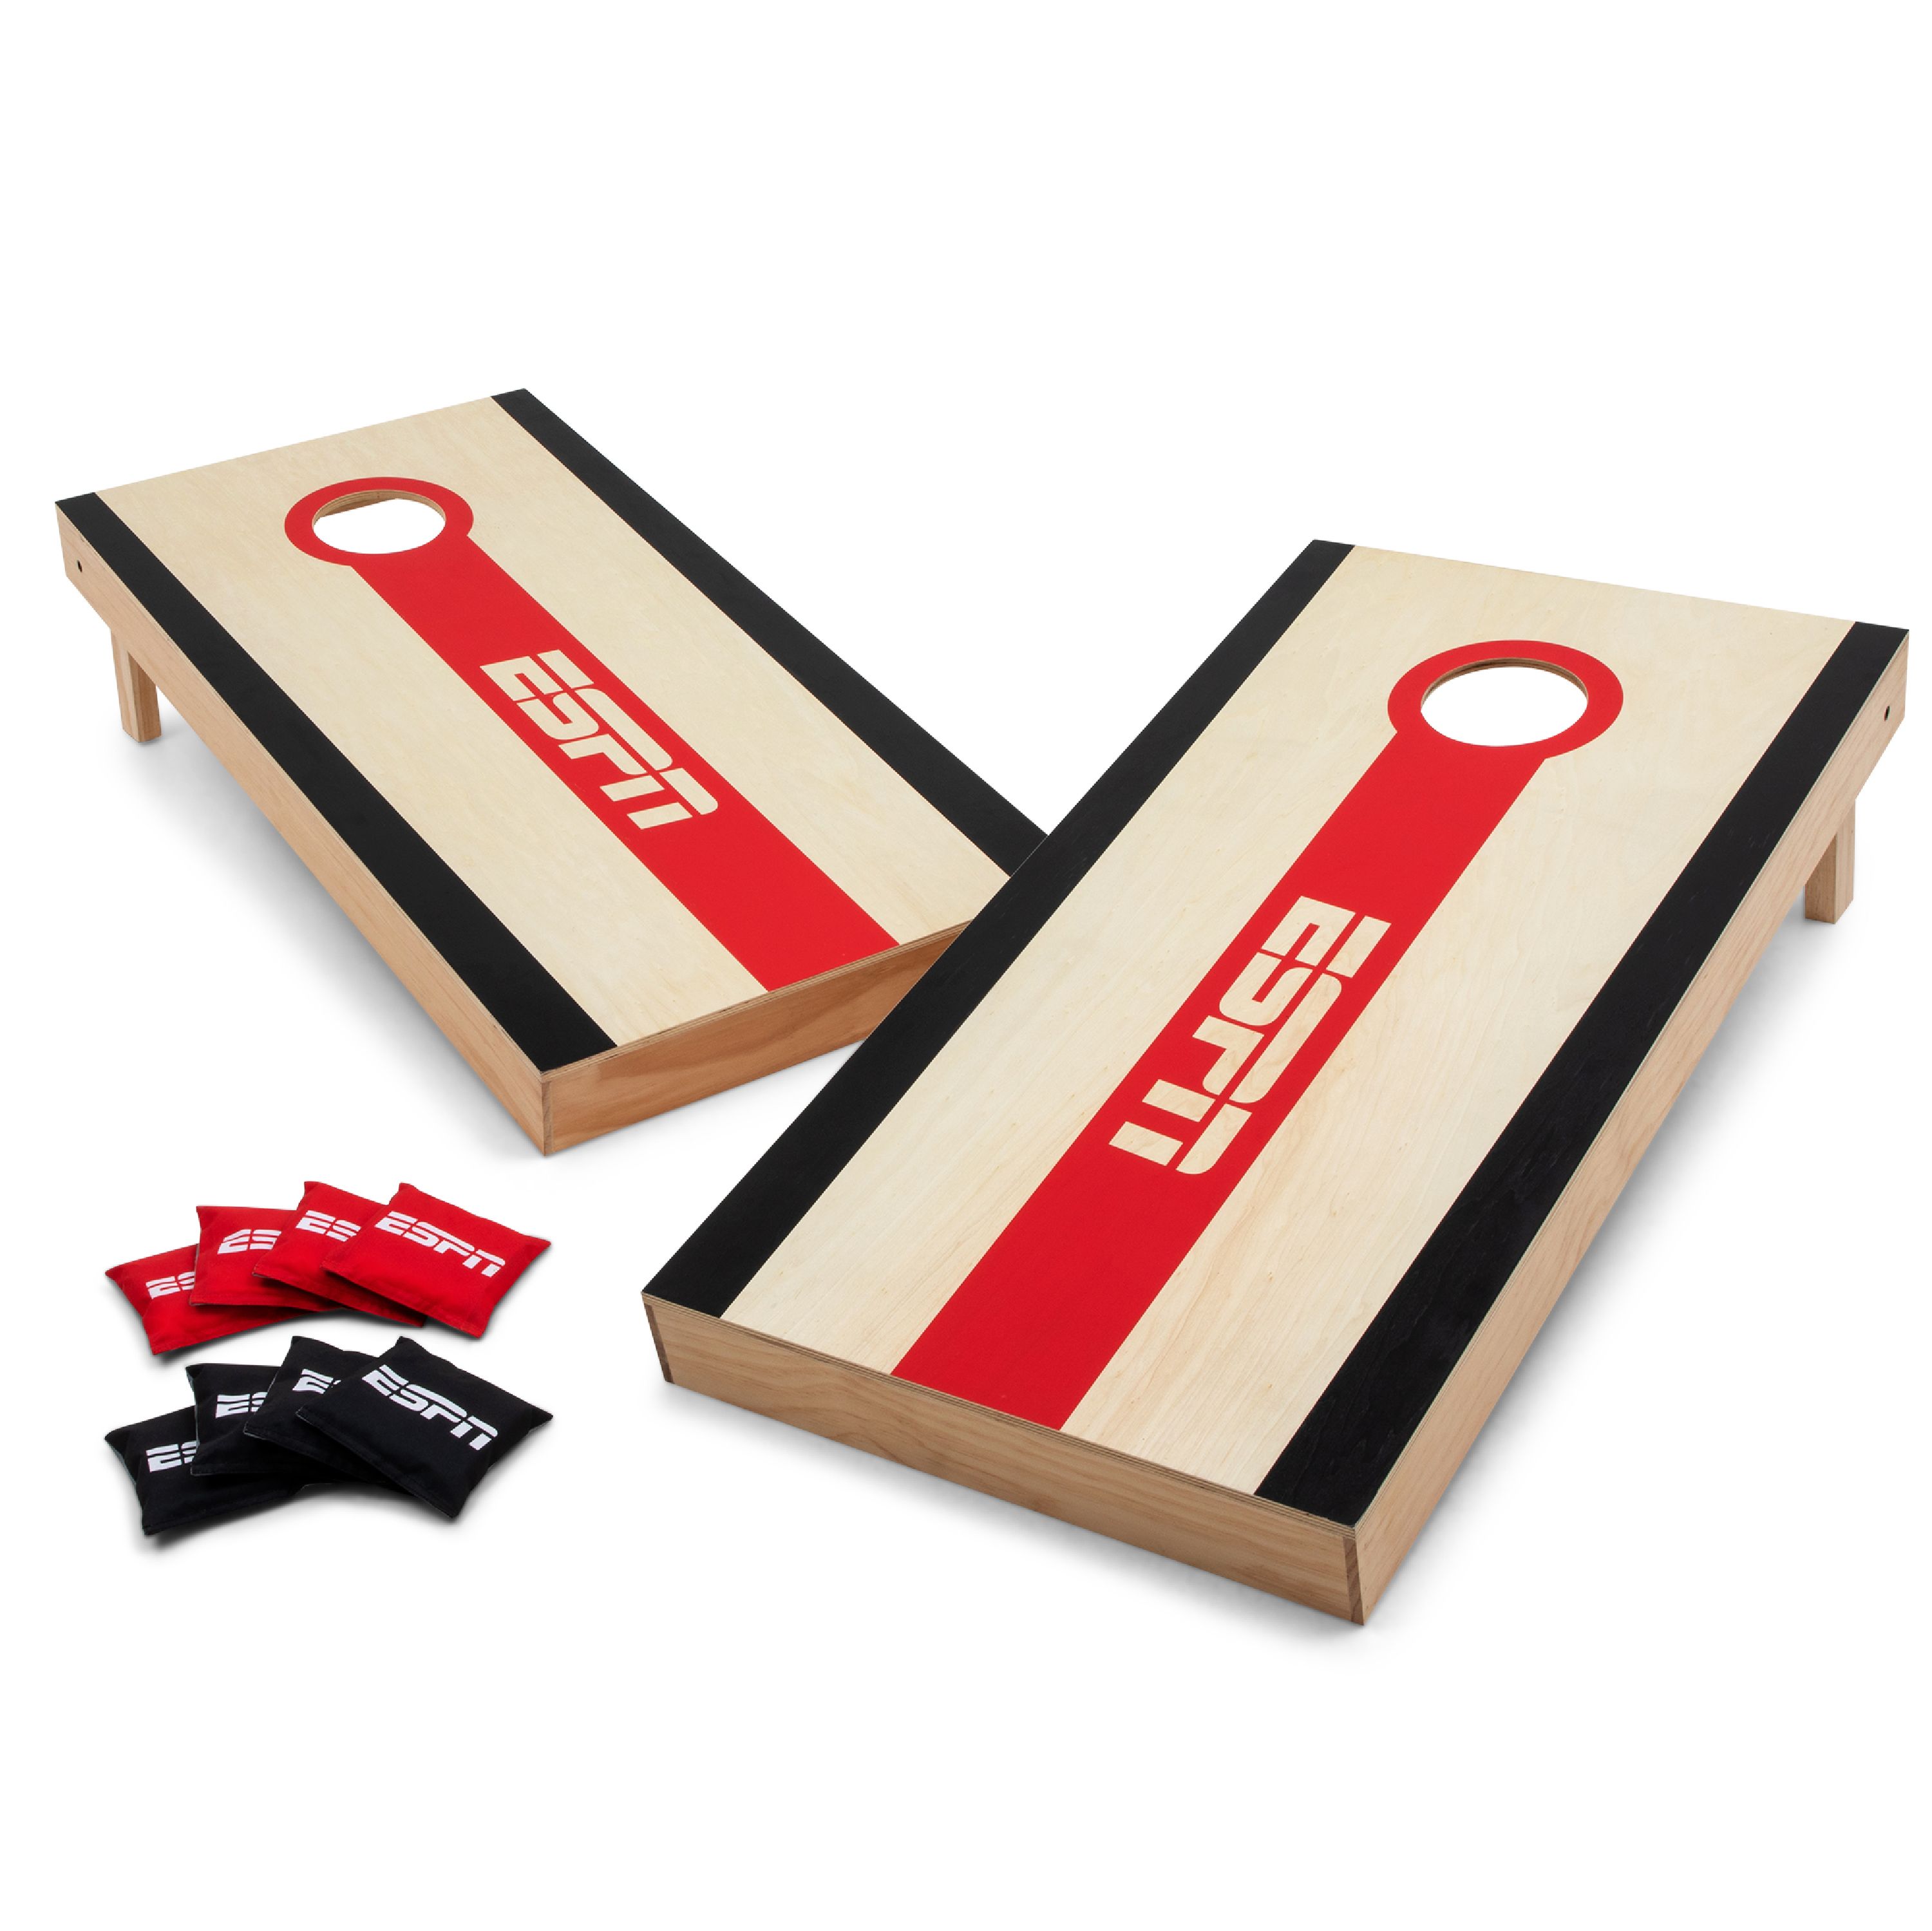 ESPN Official Tournament Size Cornhole/Bean Bag Toss Game, All Weather Bean Bags - image 1 of 9